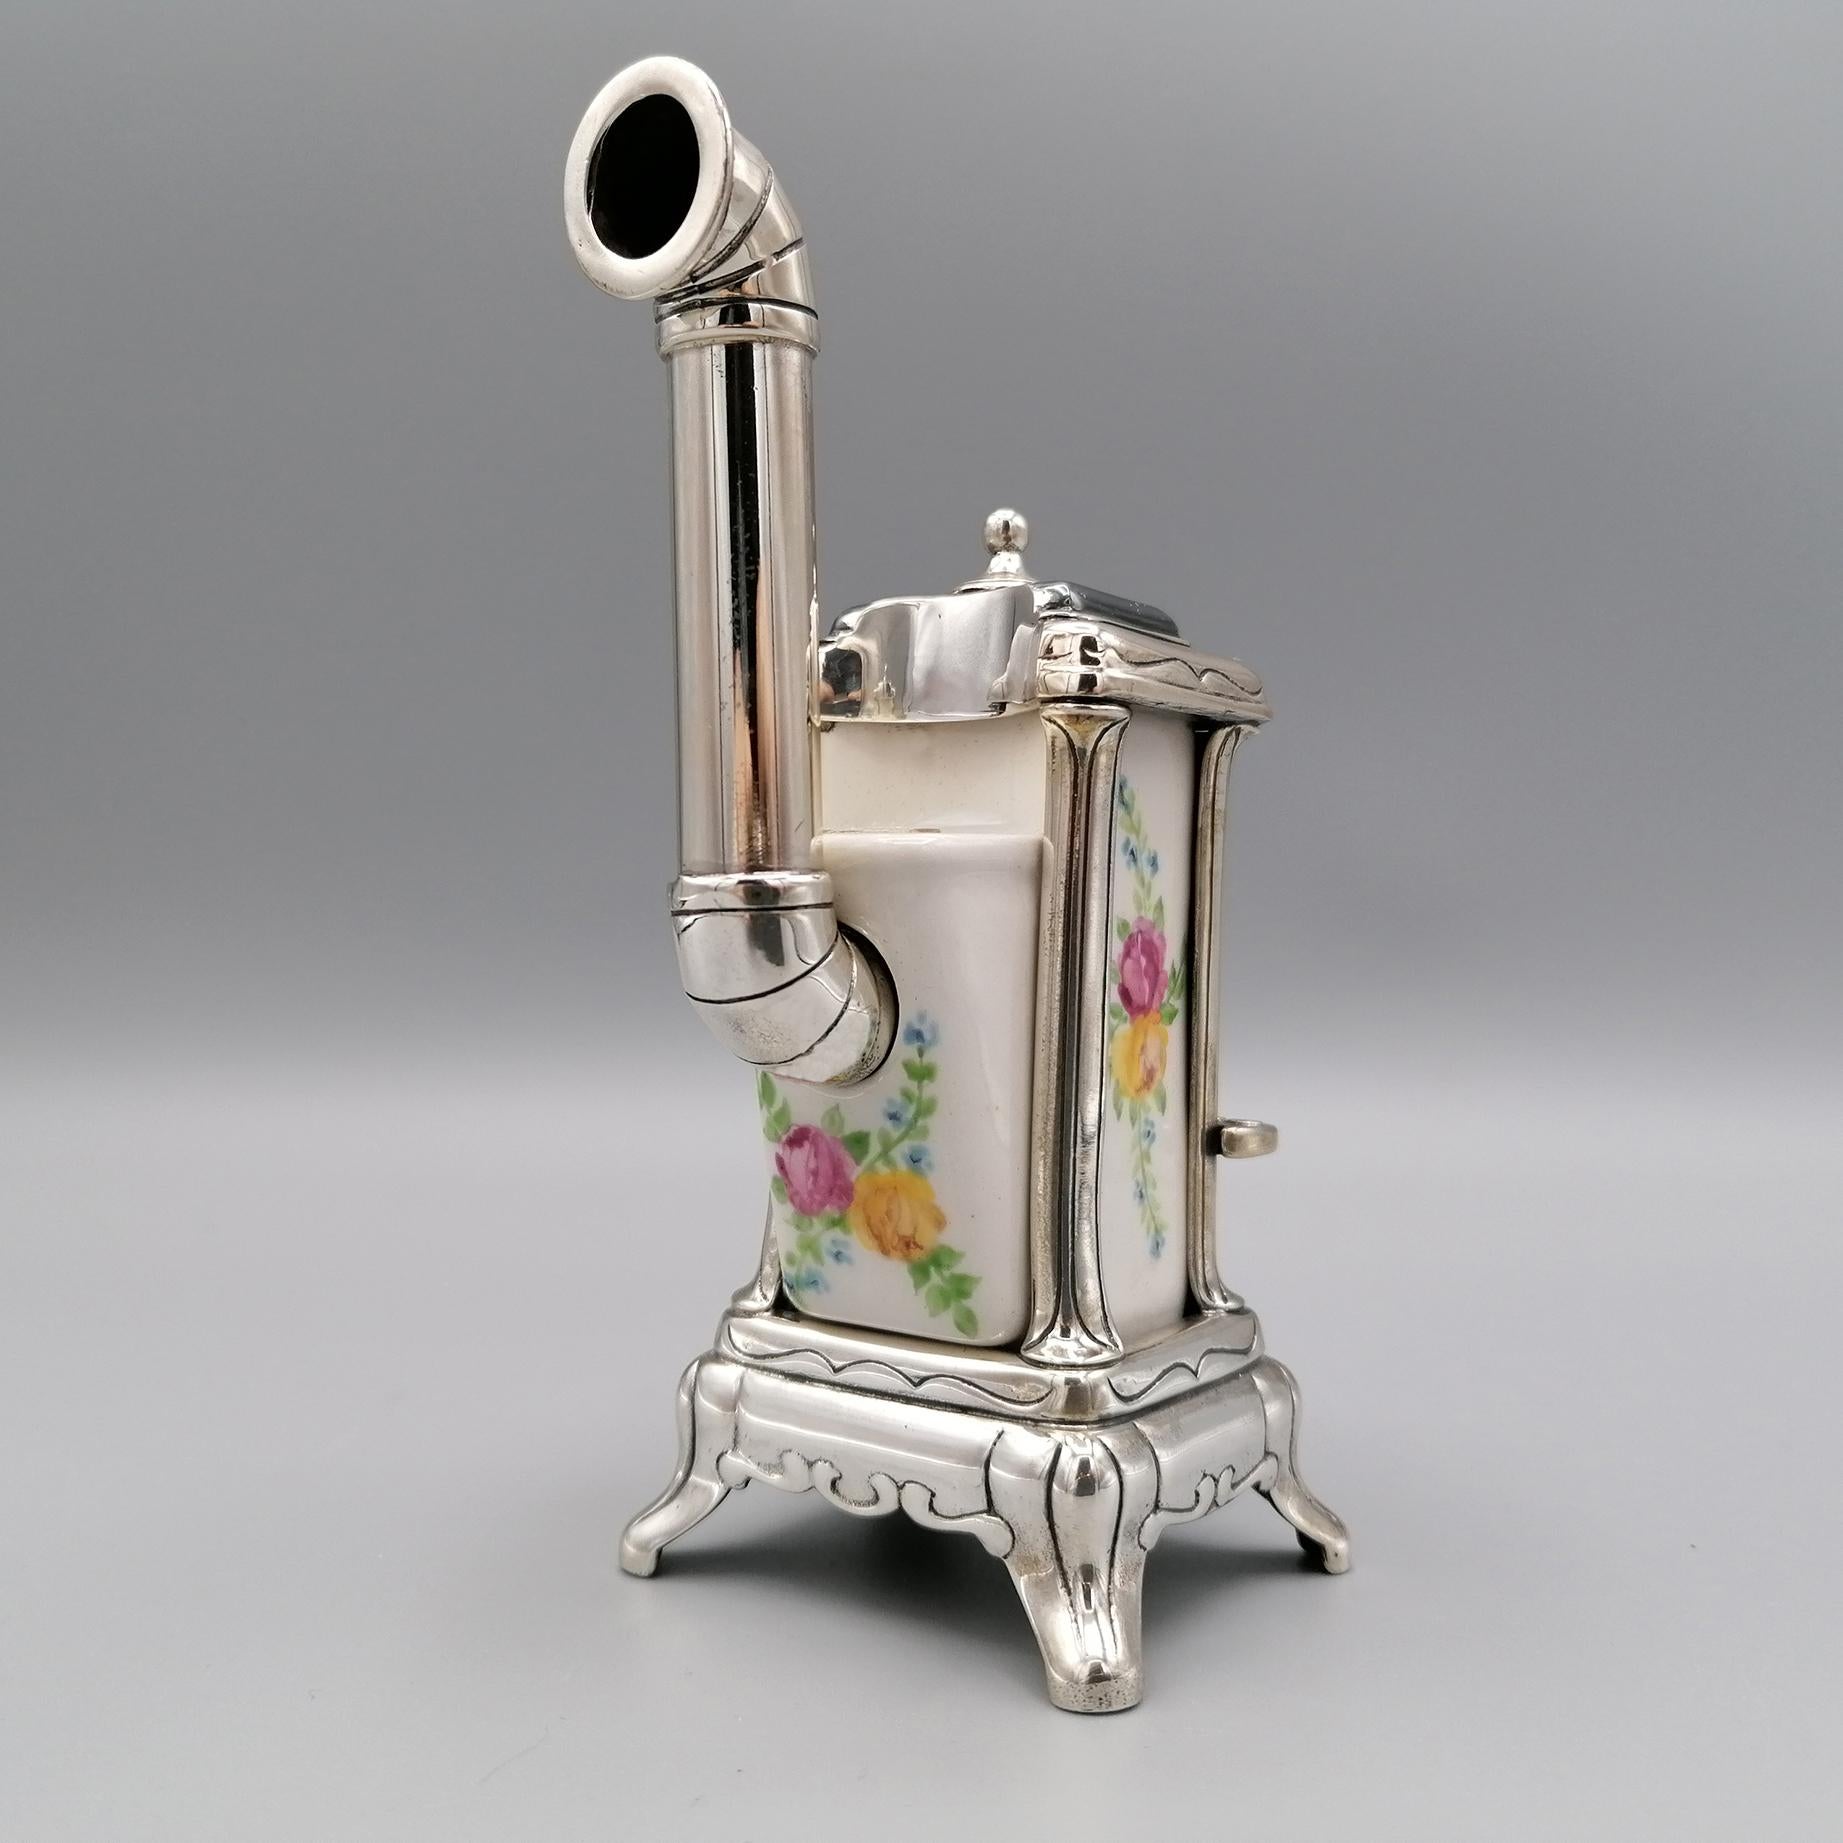 20th Century Italian Sterling Silver and Porcelain Miniature of Wood Stove For Sale 1